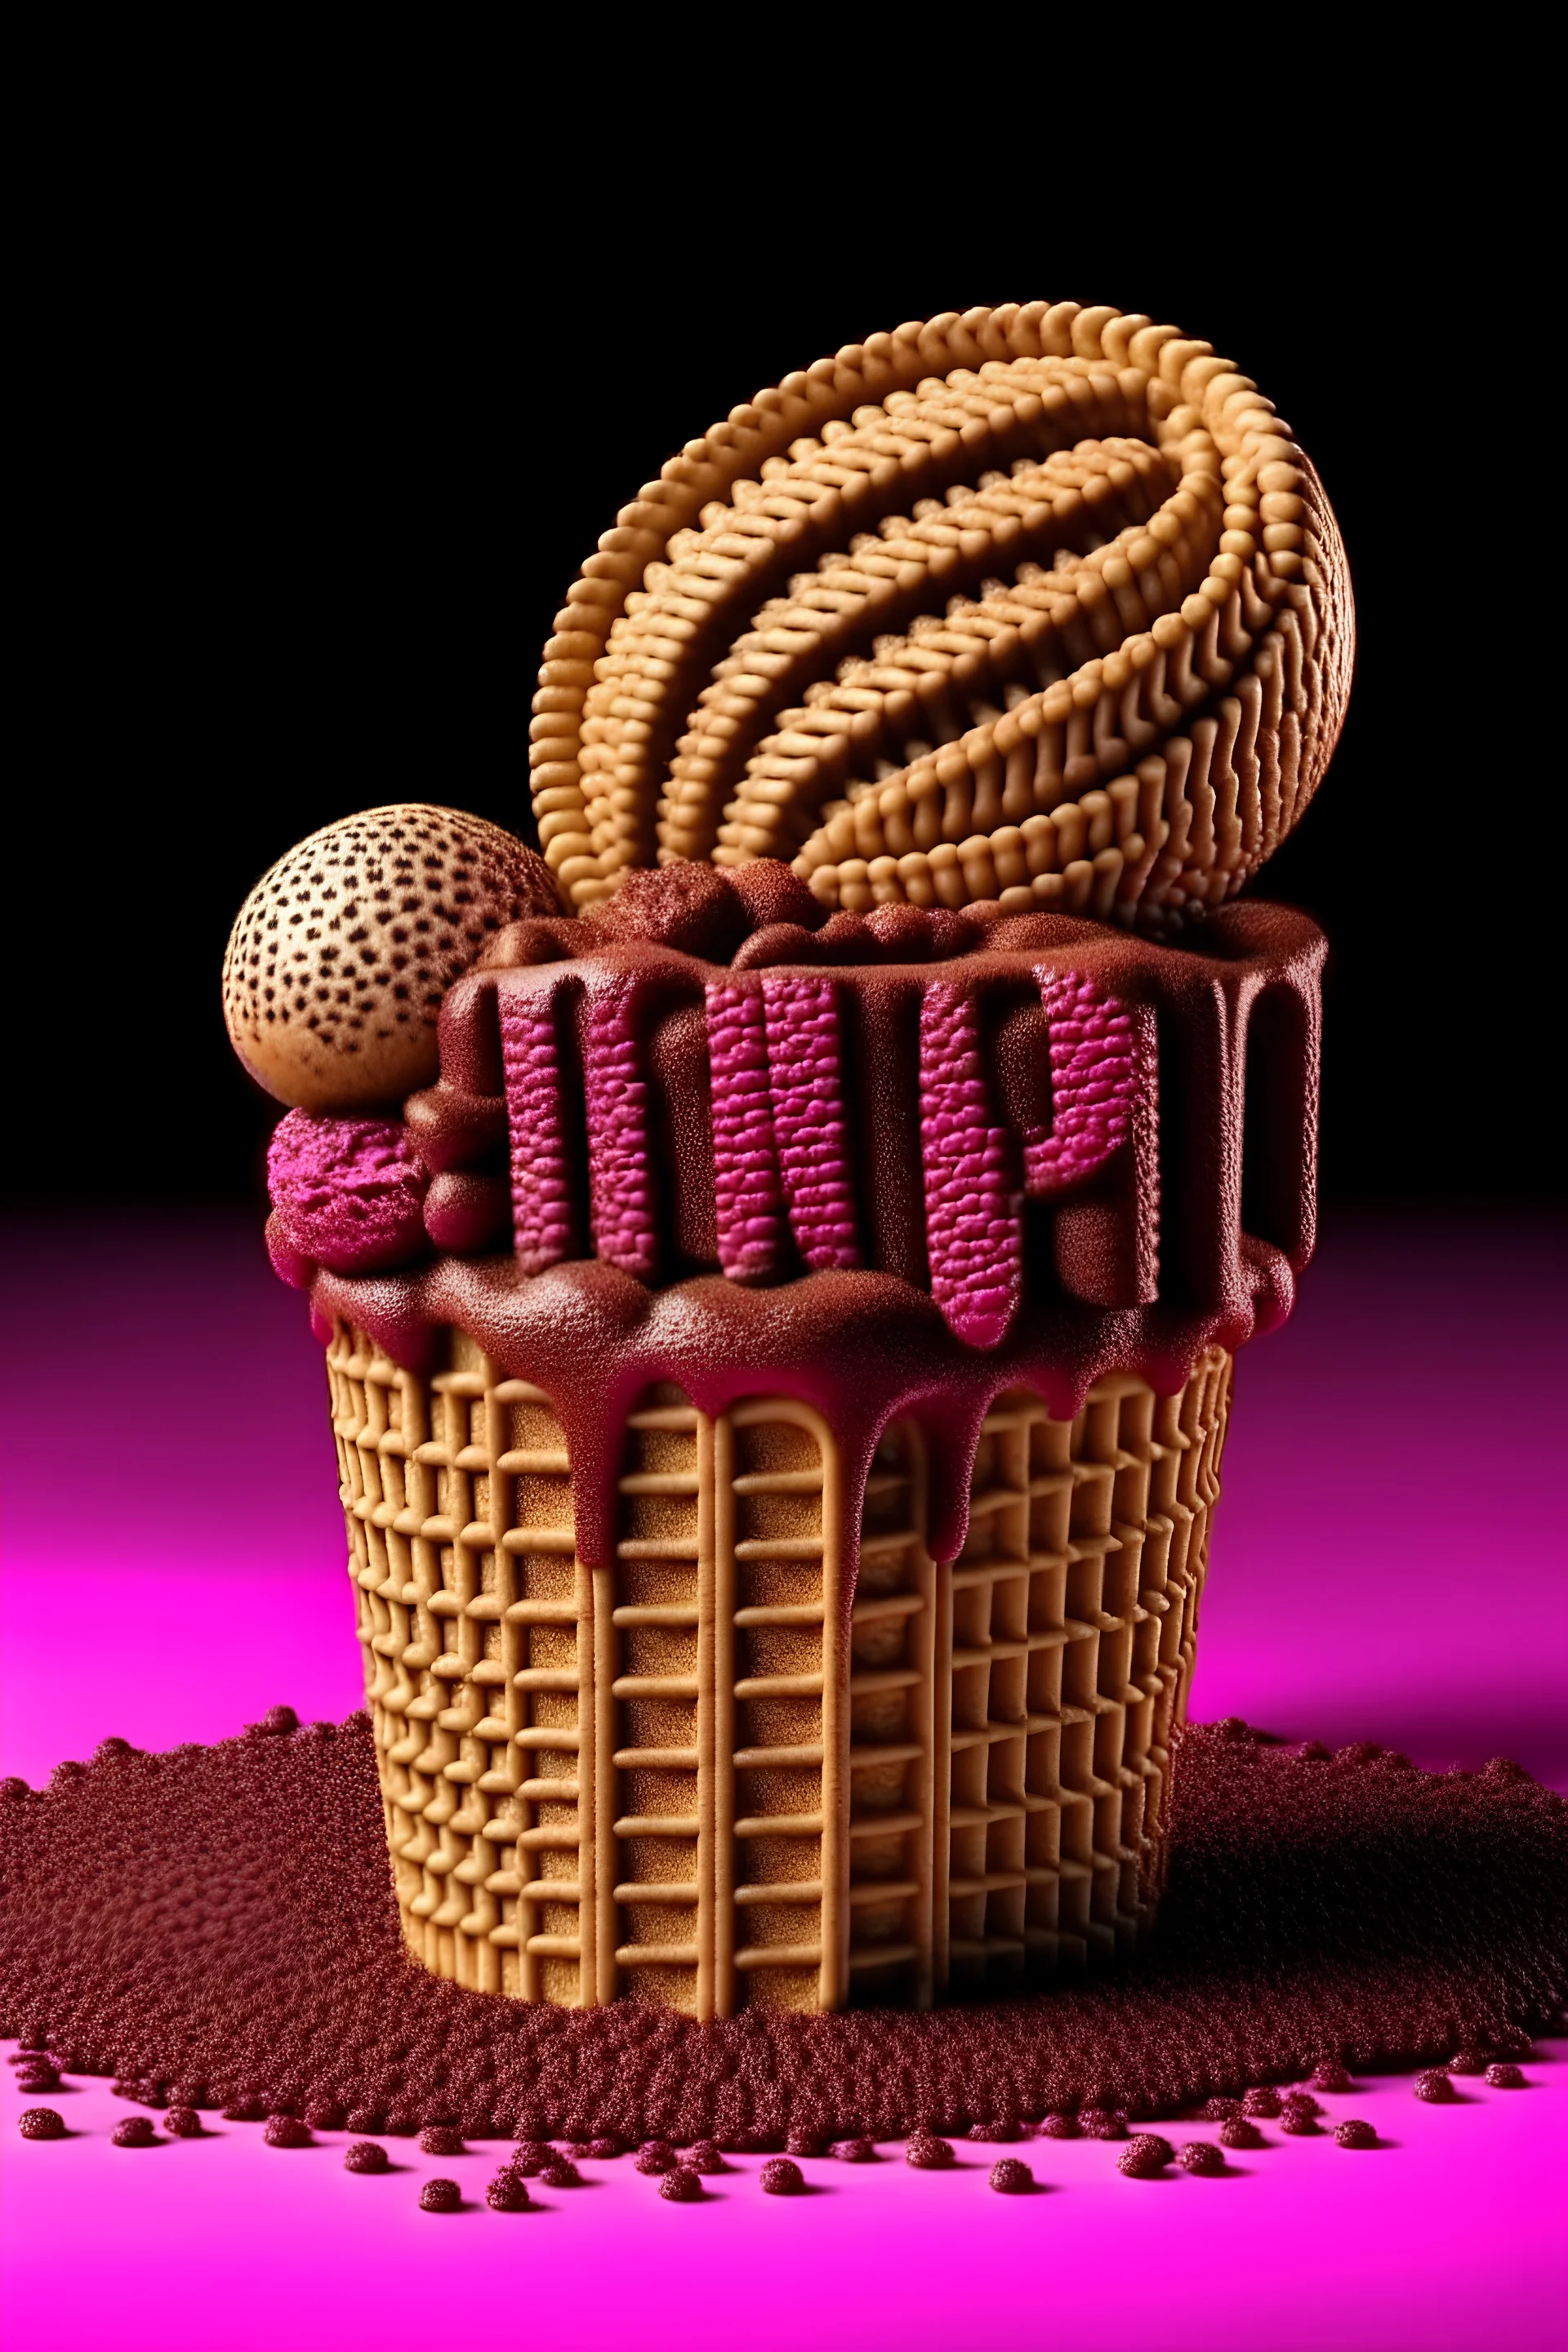 Text ‘icecream’ created of icecream ingredient chocolate ice cream with piece of chocolate spread, 3d render, cinematic, full of texture, poster, 4k, typography, fashion